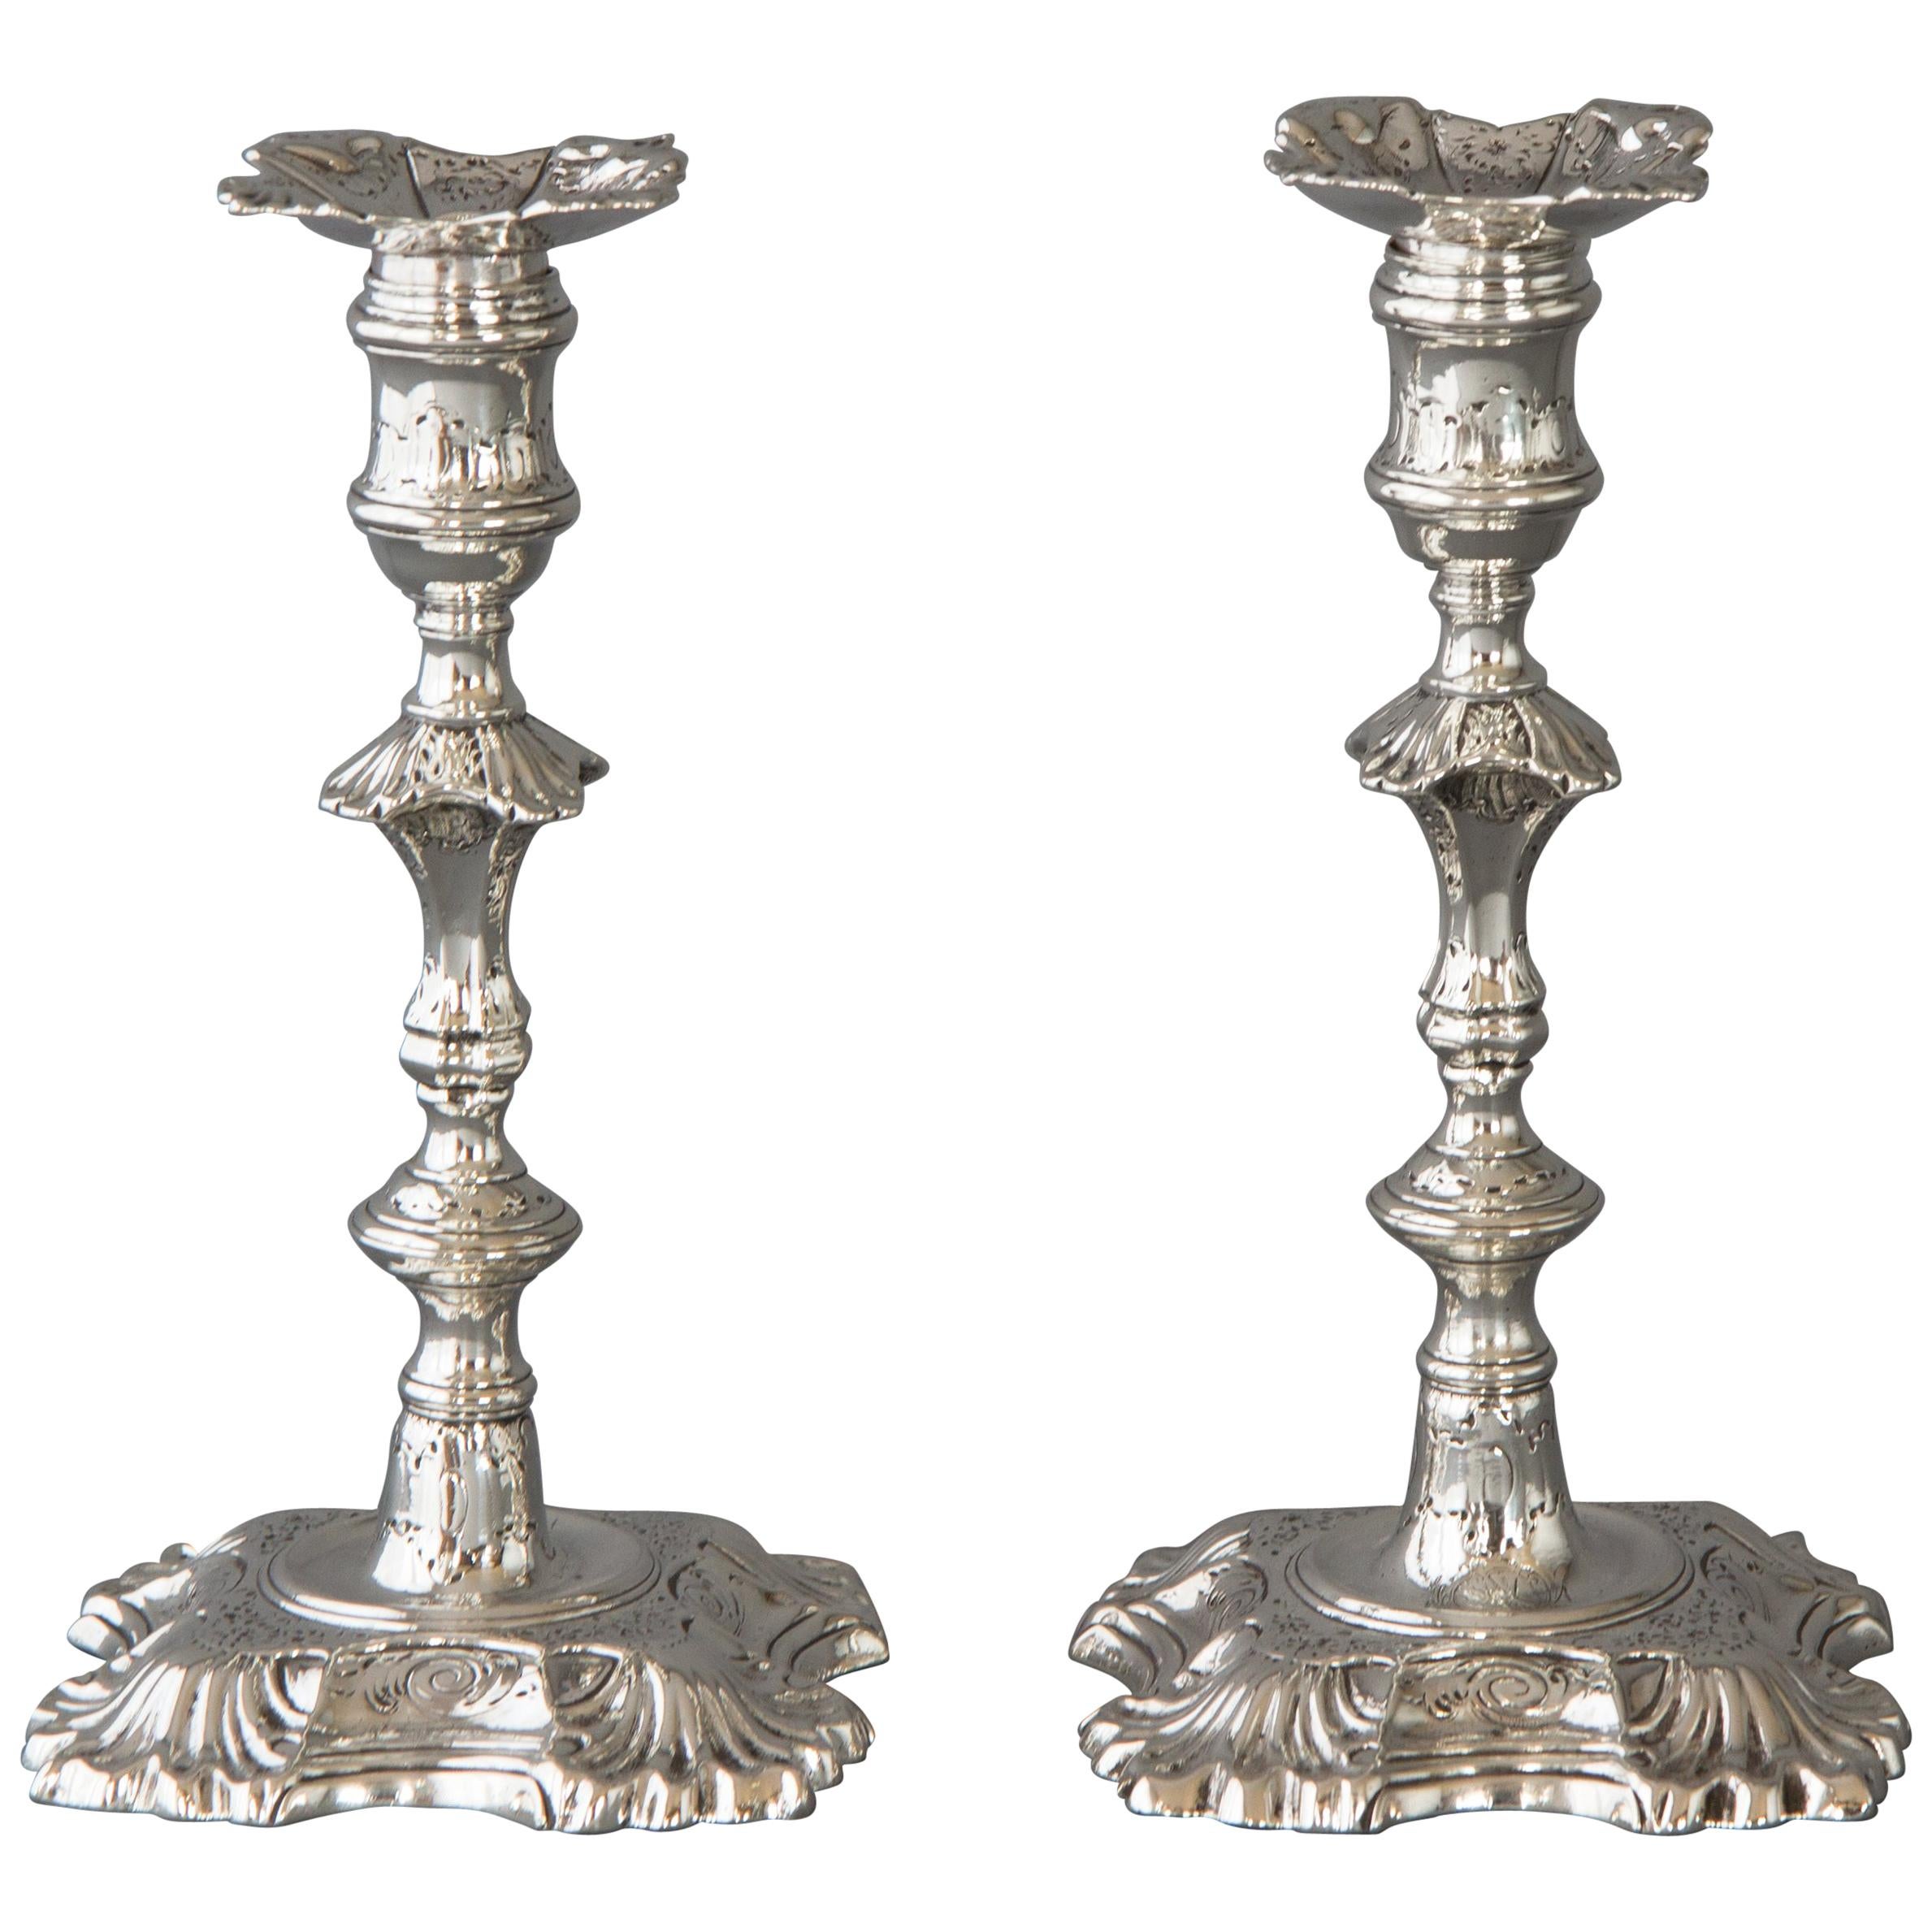 Superb Pair of Cast George II Silver Candlesticks, London 1749